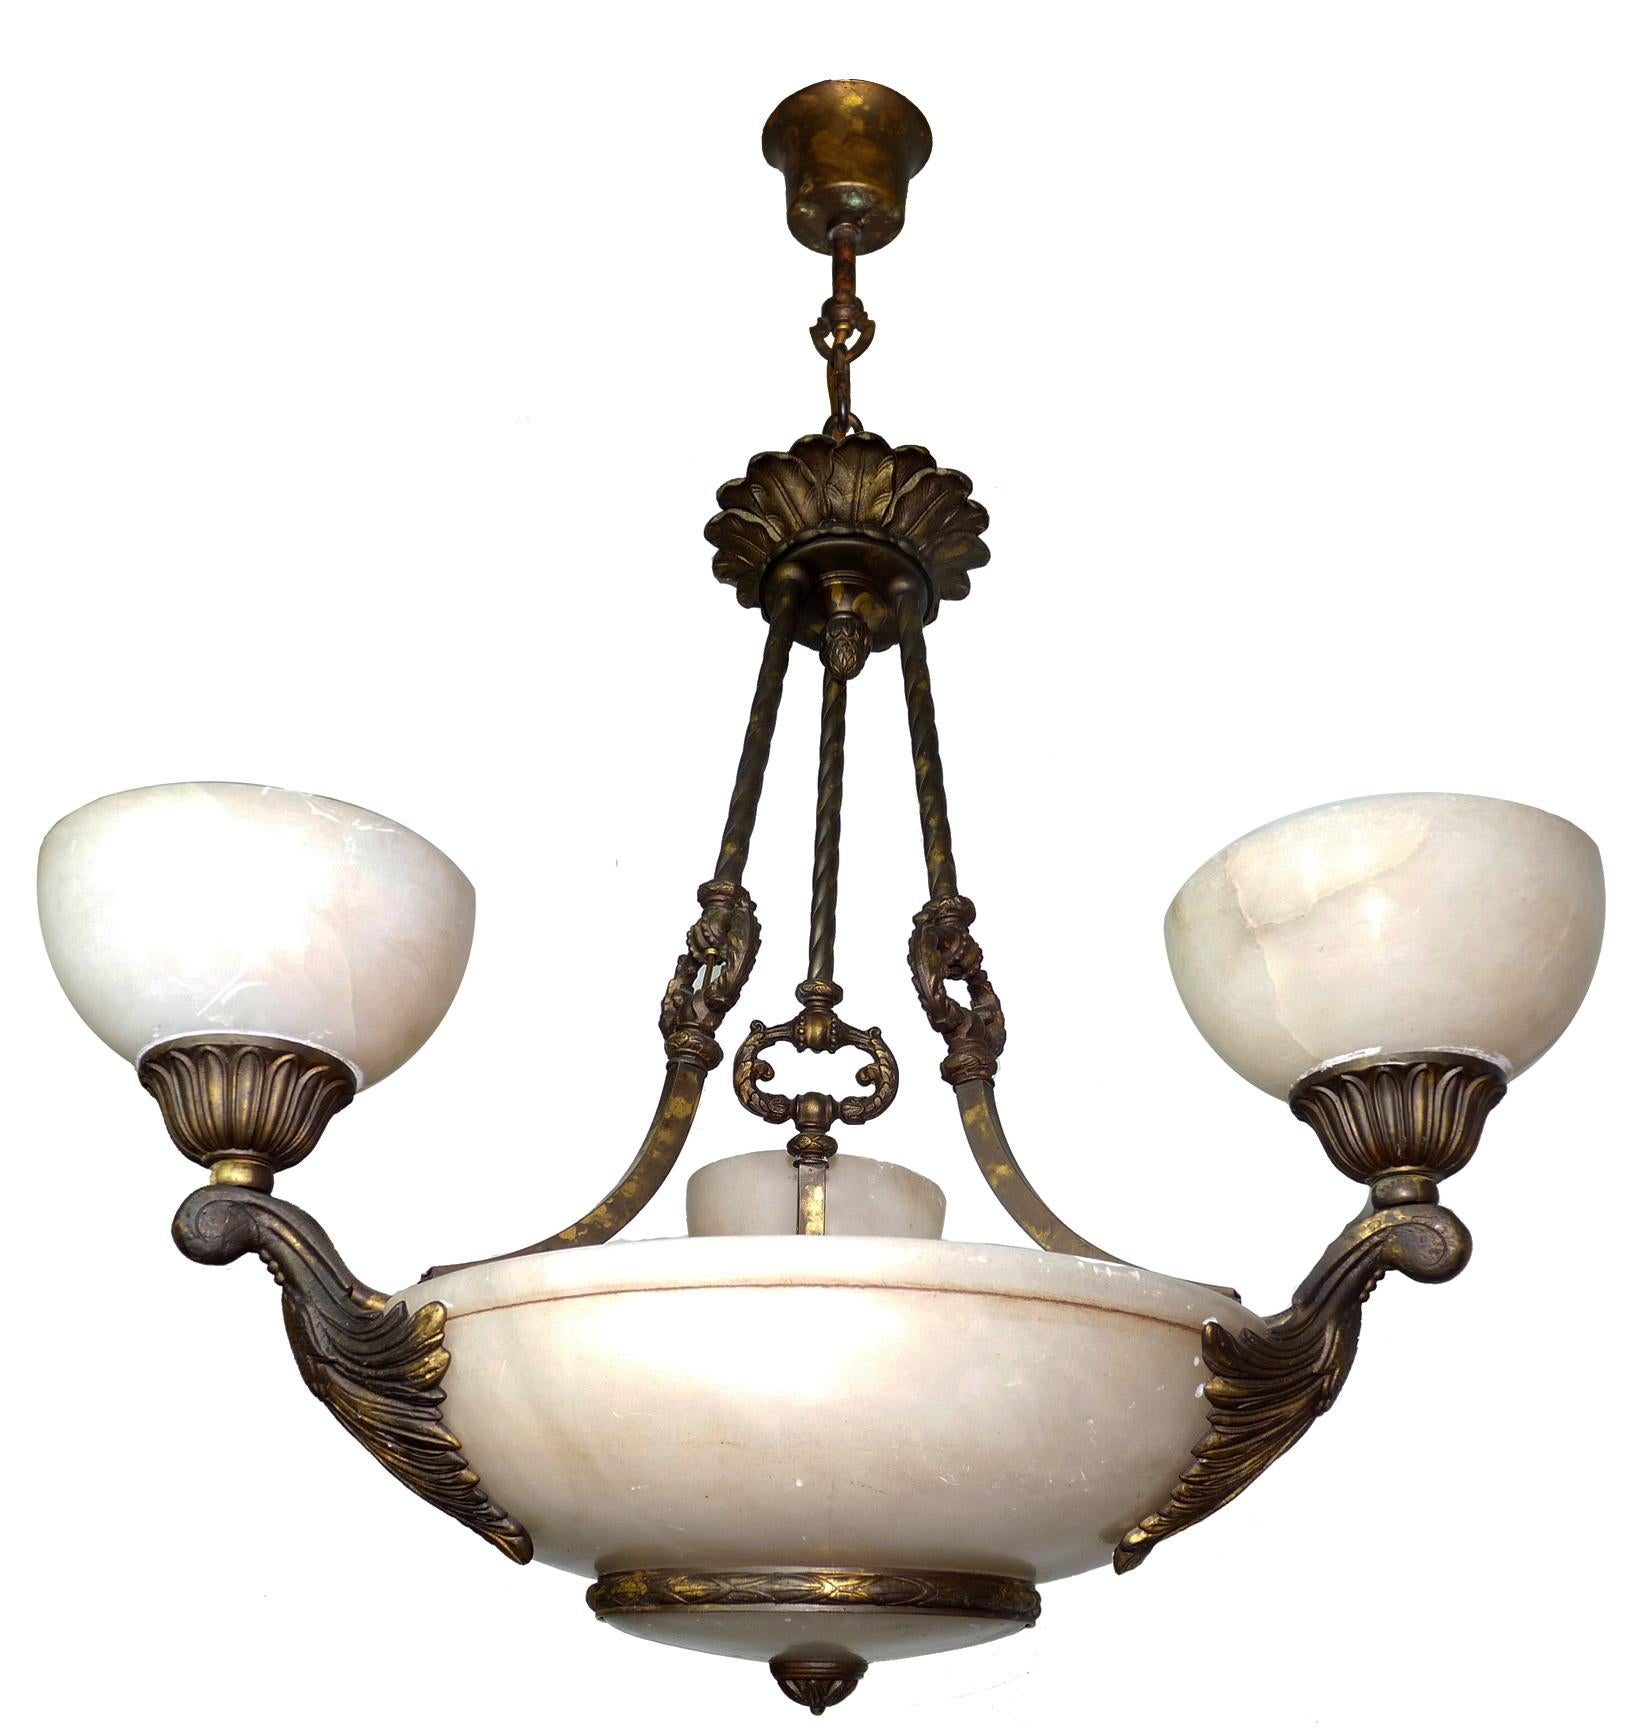 Carved Midcentury French Art Deco and Neoclassical White Marble, Gilt Chandelier For Sale